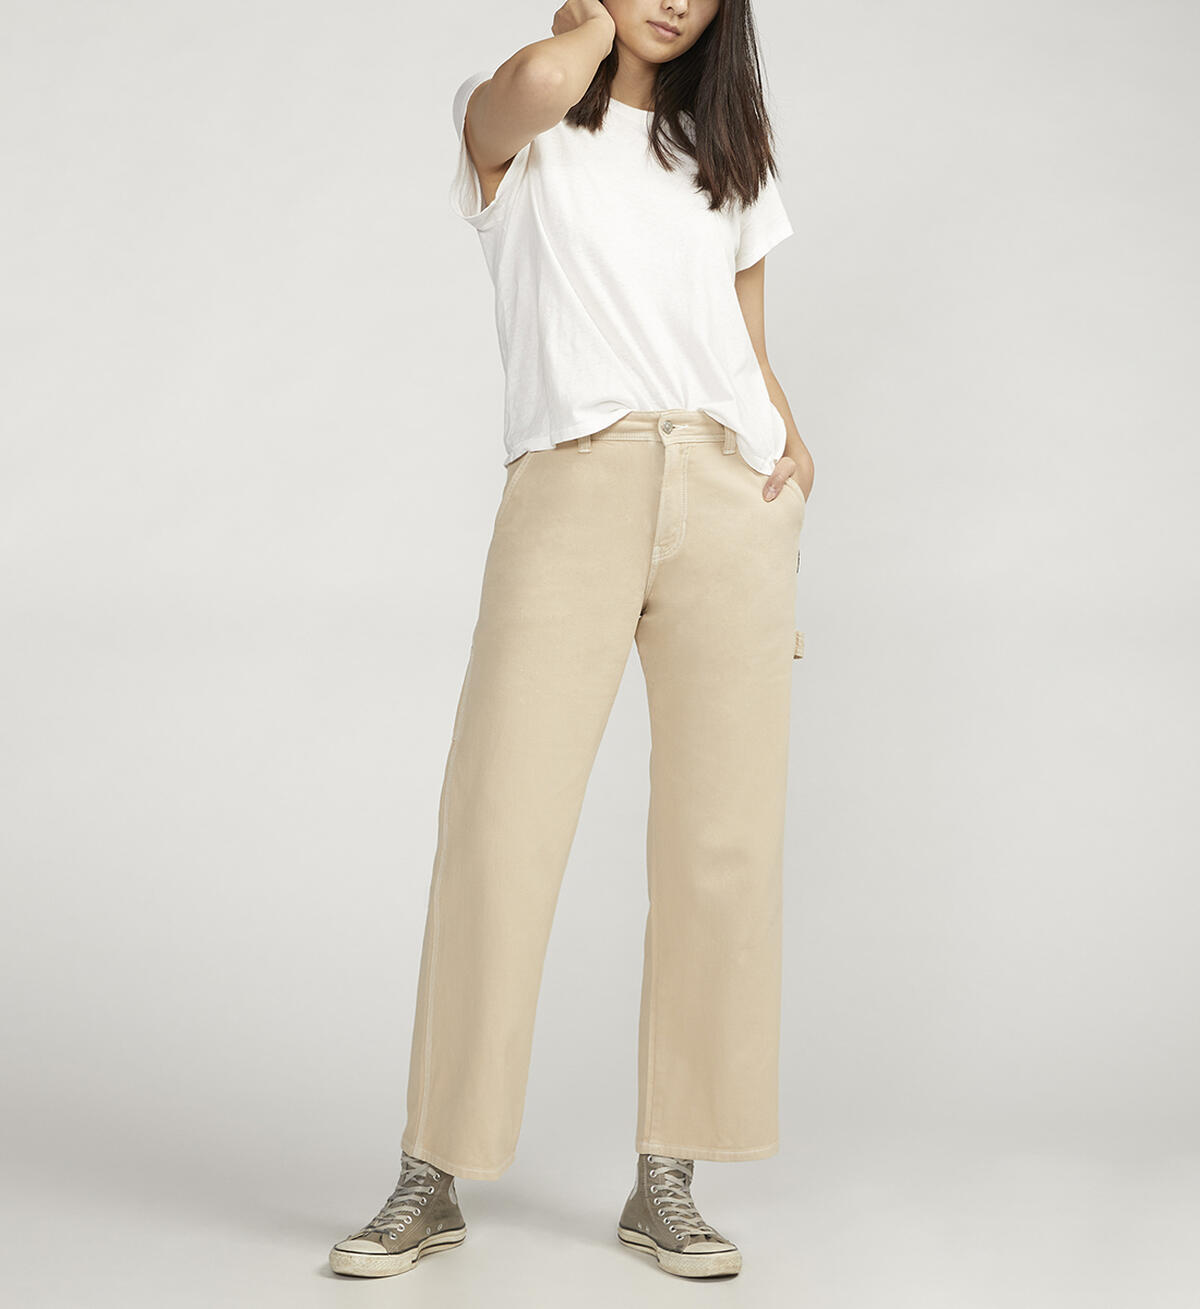 Relaxed Fit Straight Leg Carpenter Pant, Light Tan, hi-res image number 0